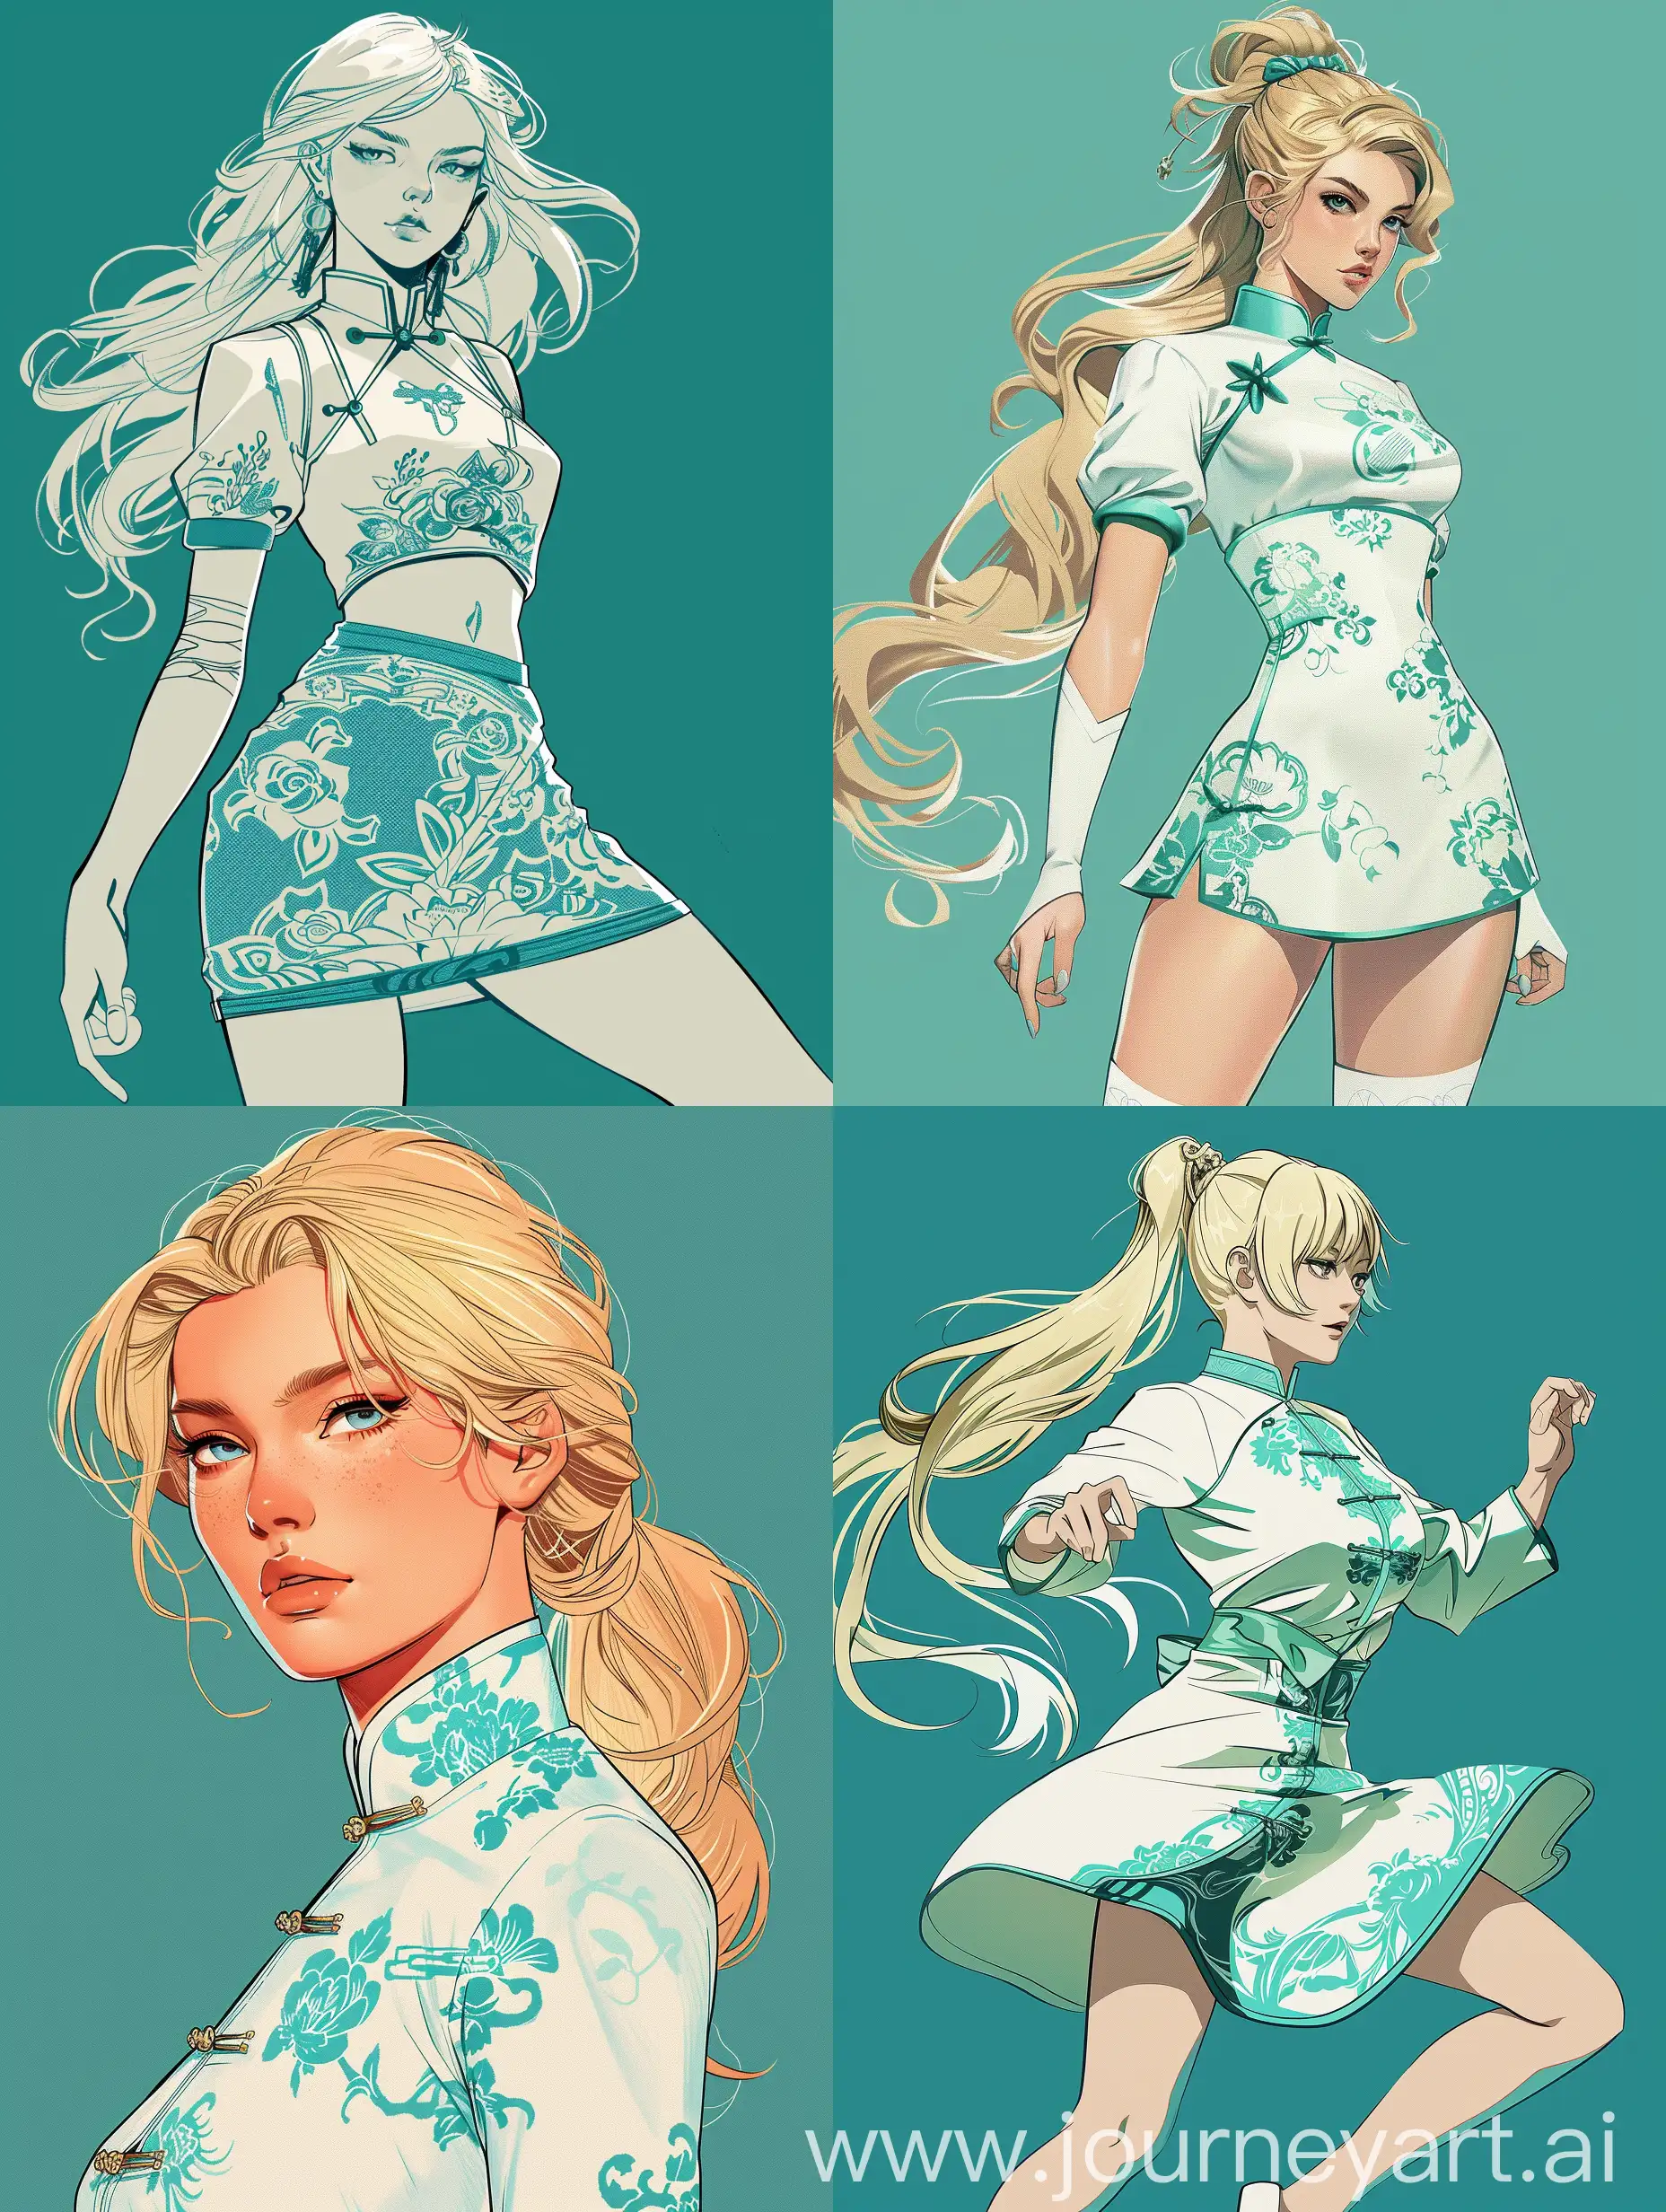 Digital art of a blonde girl , 22 years old, school uniform, on a solid teal background that complements her outfit. She is wearing a white and teal qipao with intricate designs. The image features clean and bold line art with dynamic line weight for depth. Dramatic cel shading and soft shading highlight her heroic pose and dynamic action. Vibrant colors with blending techniques ensure smooth transitions. Volumetric lighting adds depth, with highlights and reflections emphasizing her expressive eyes and glossy hair. Subtle textures add realism, and the composition follows the rule of thirds for balanced framing. The artwork is a full shot, meant for a 4K resolution wallpaper